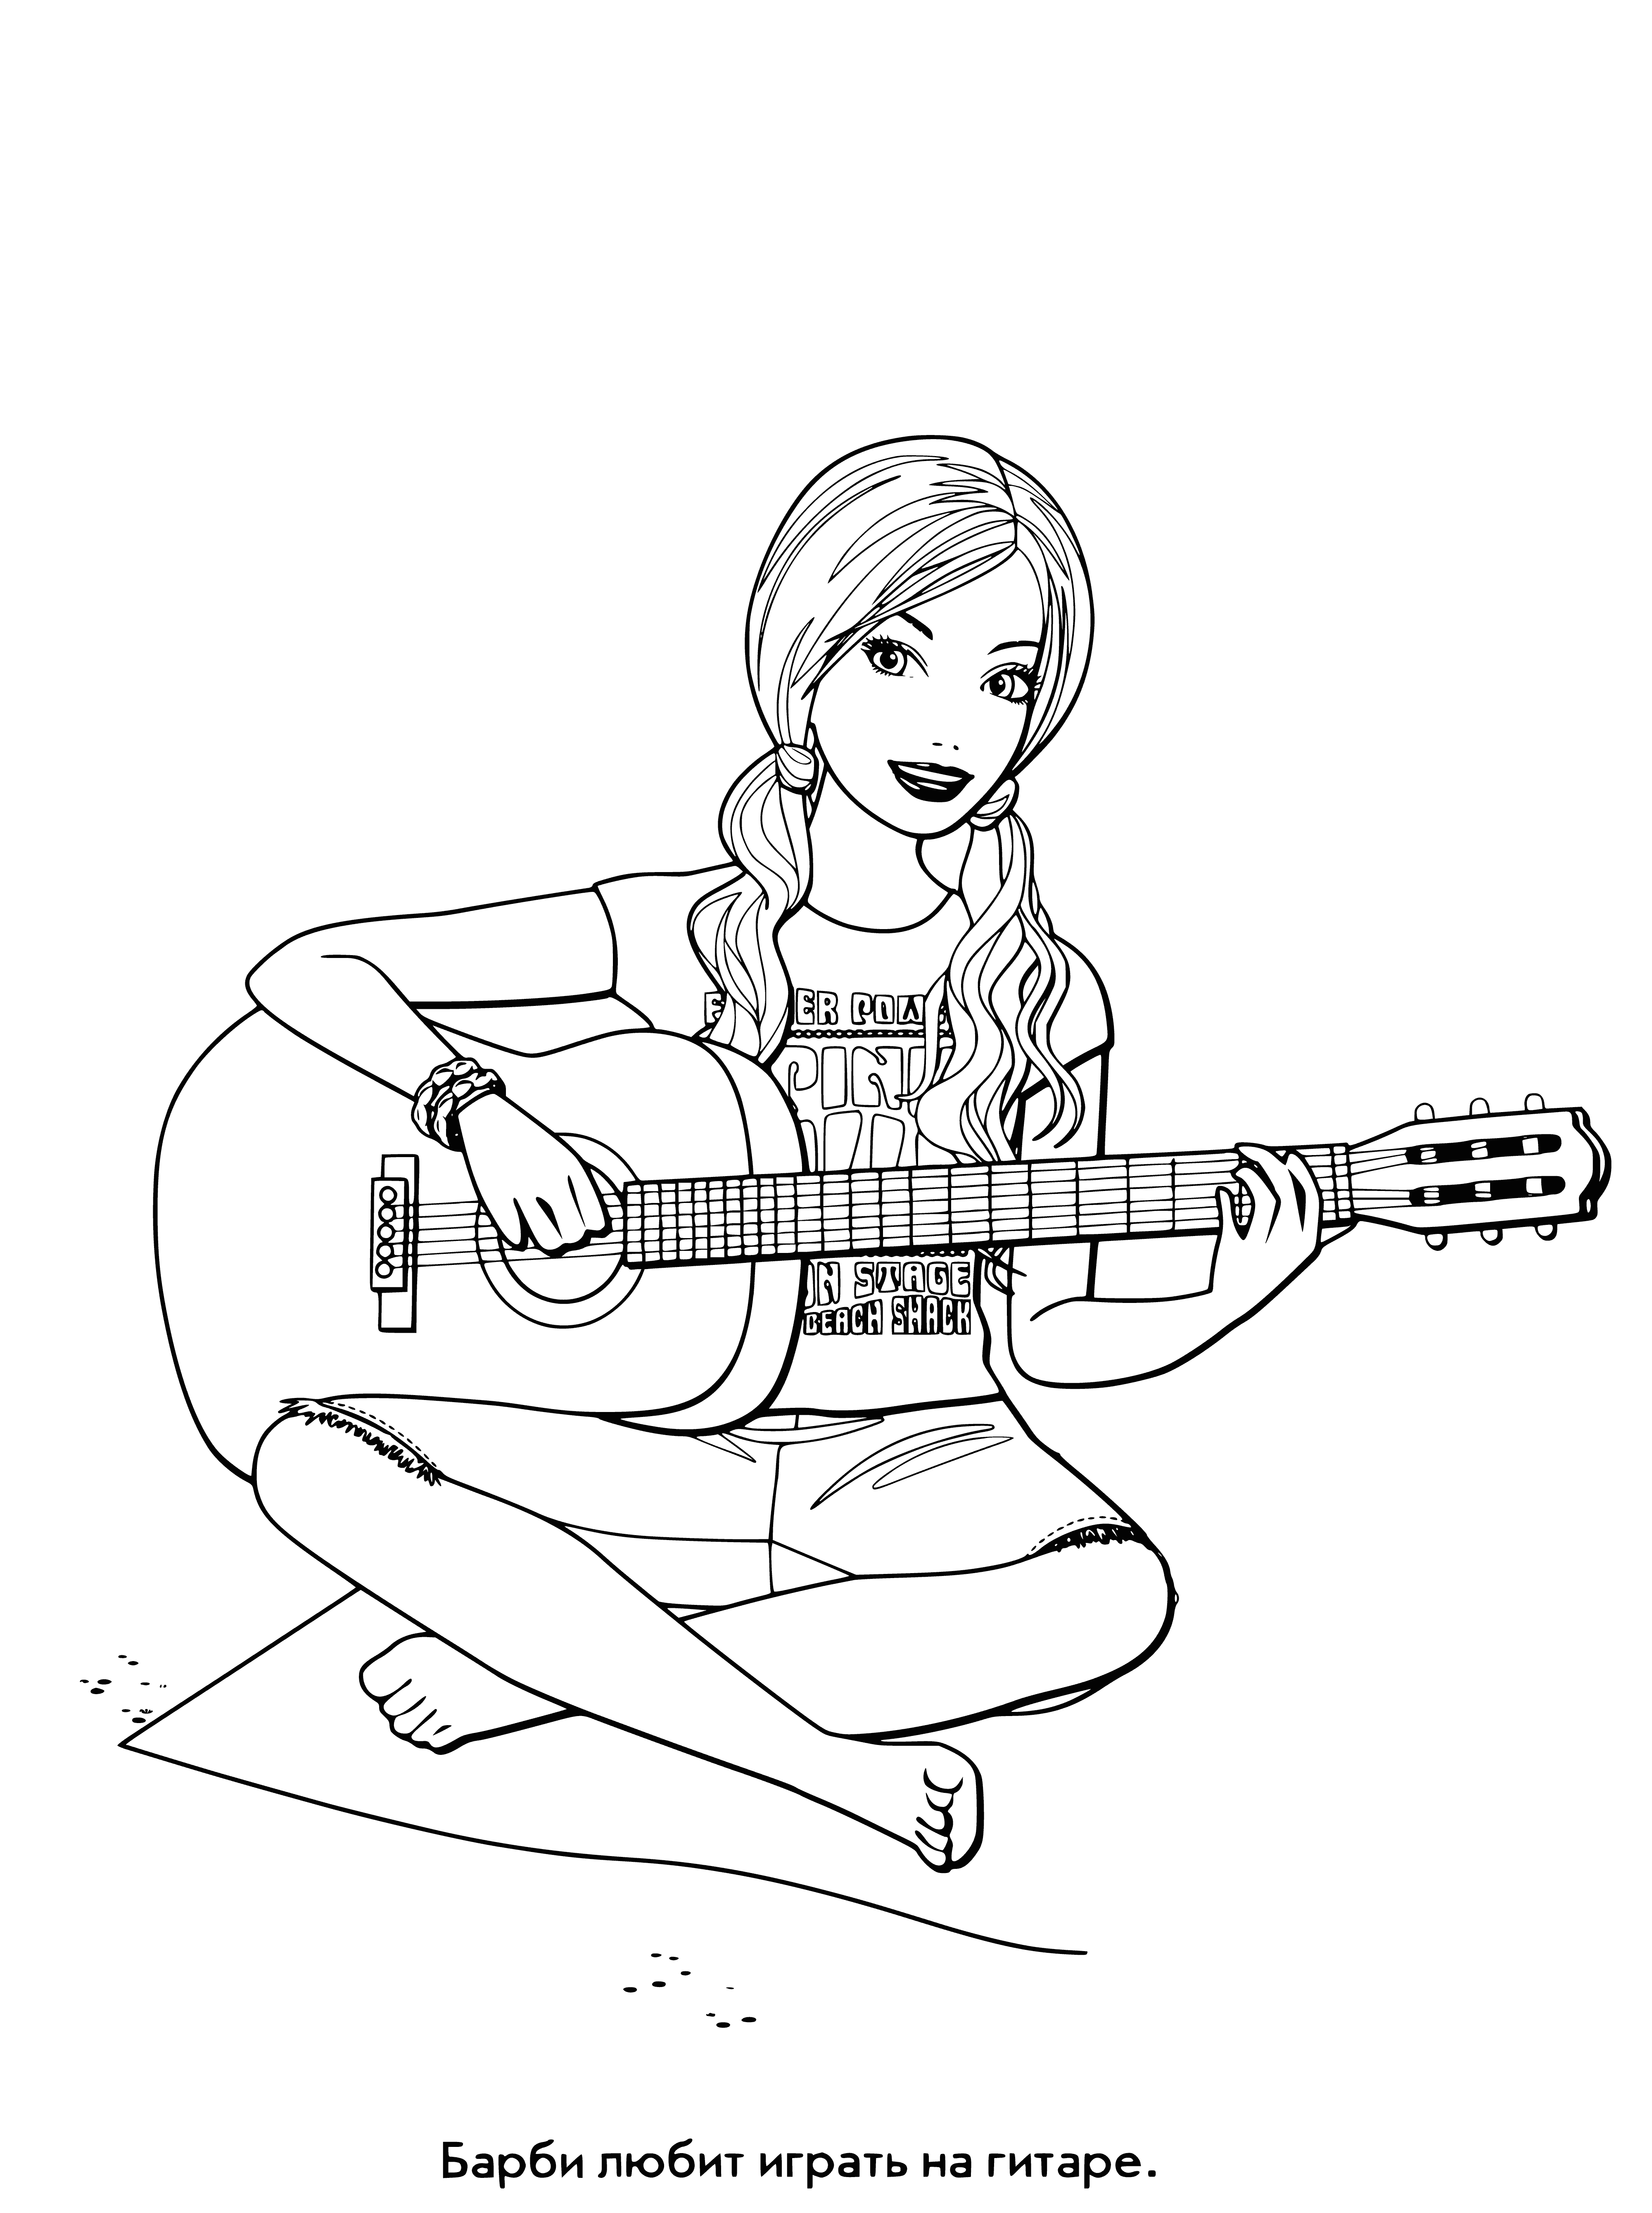 coloring page: Barbie is a blond doll with a guitar in a pink dress with white polka dots and a purple belt. #Barbie